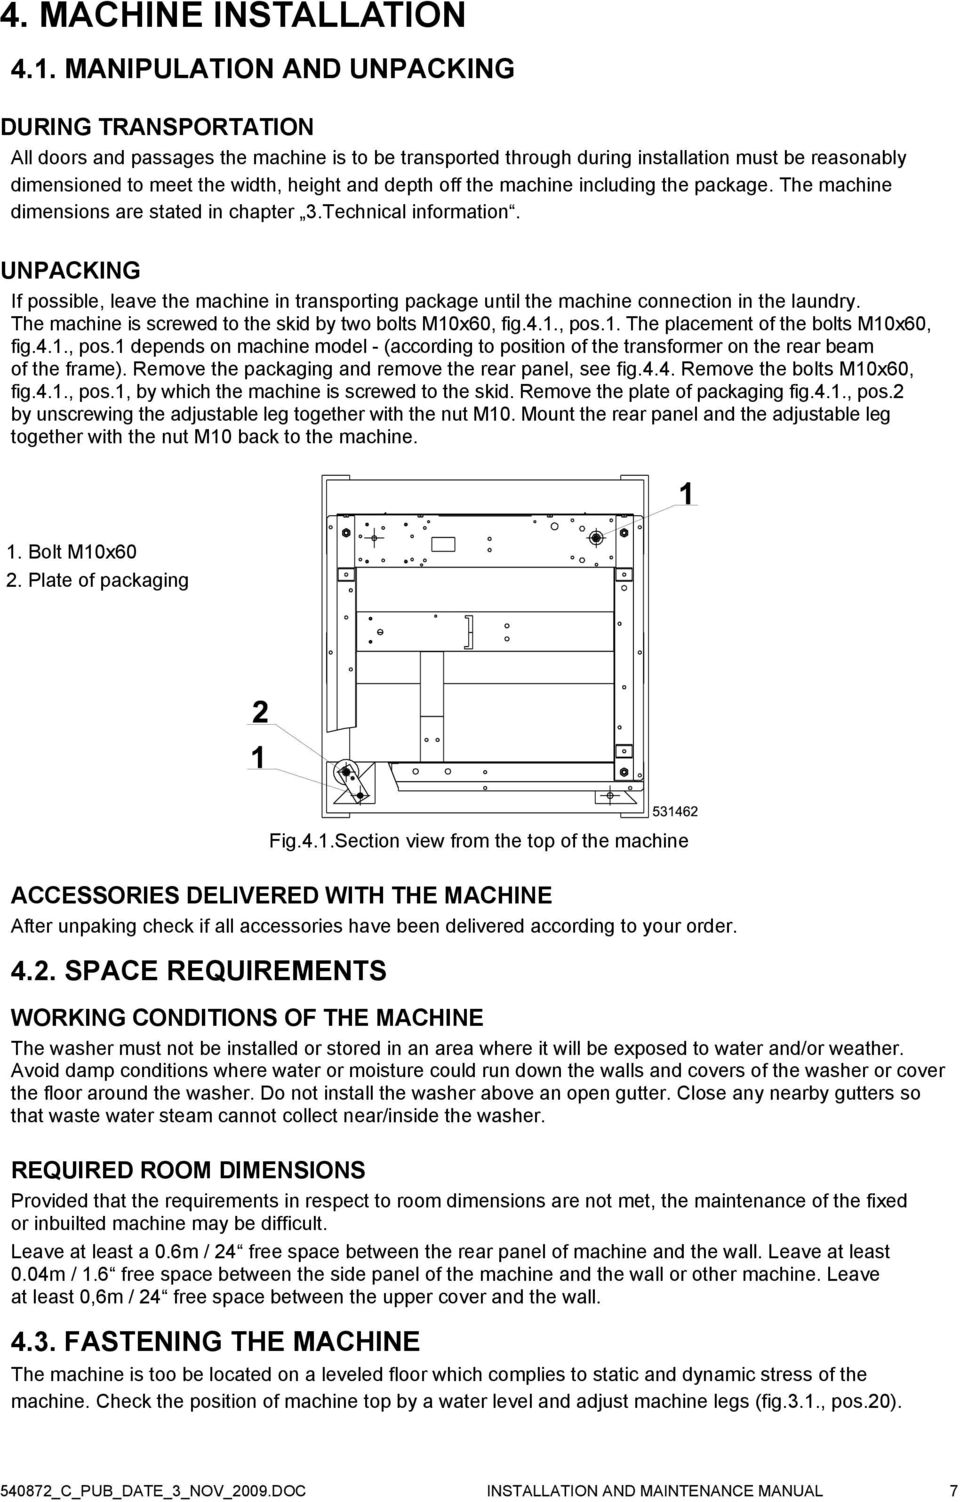 off the machine including the package. The machine dimensions are stated in chapter 3.Technical information.